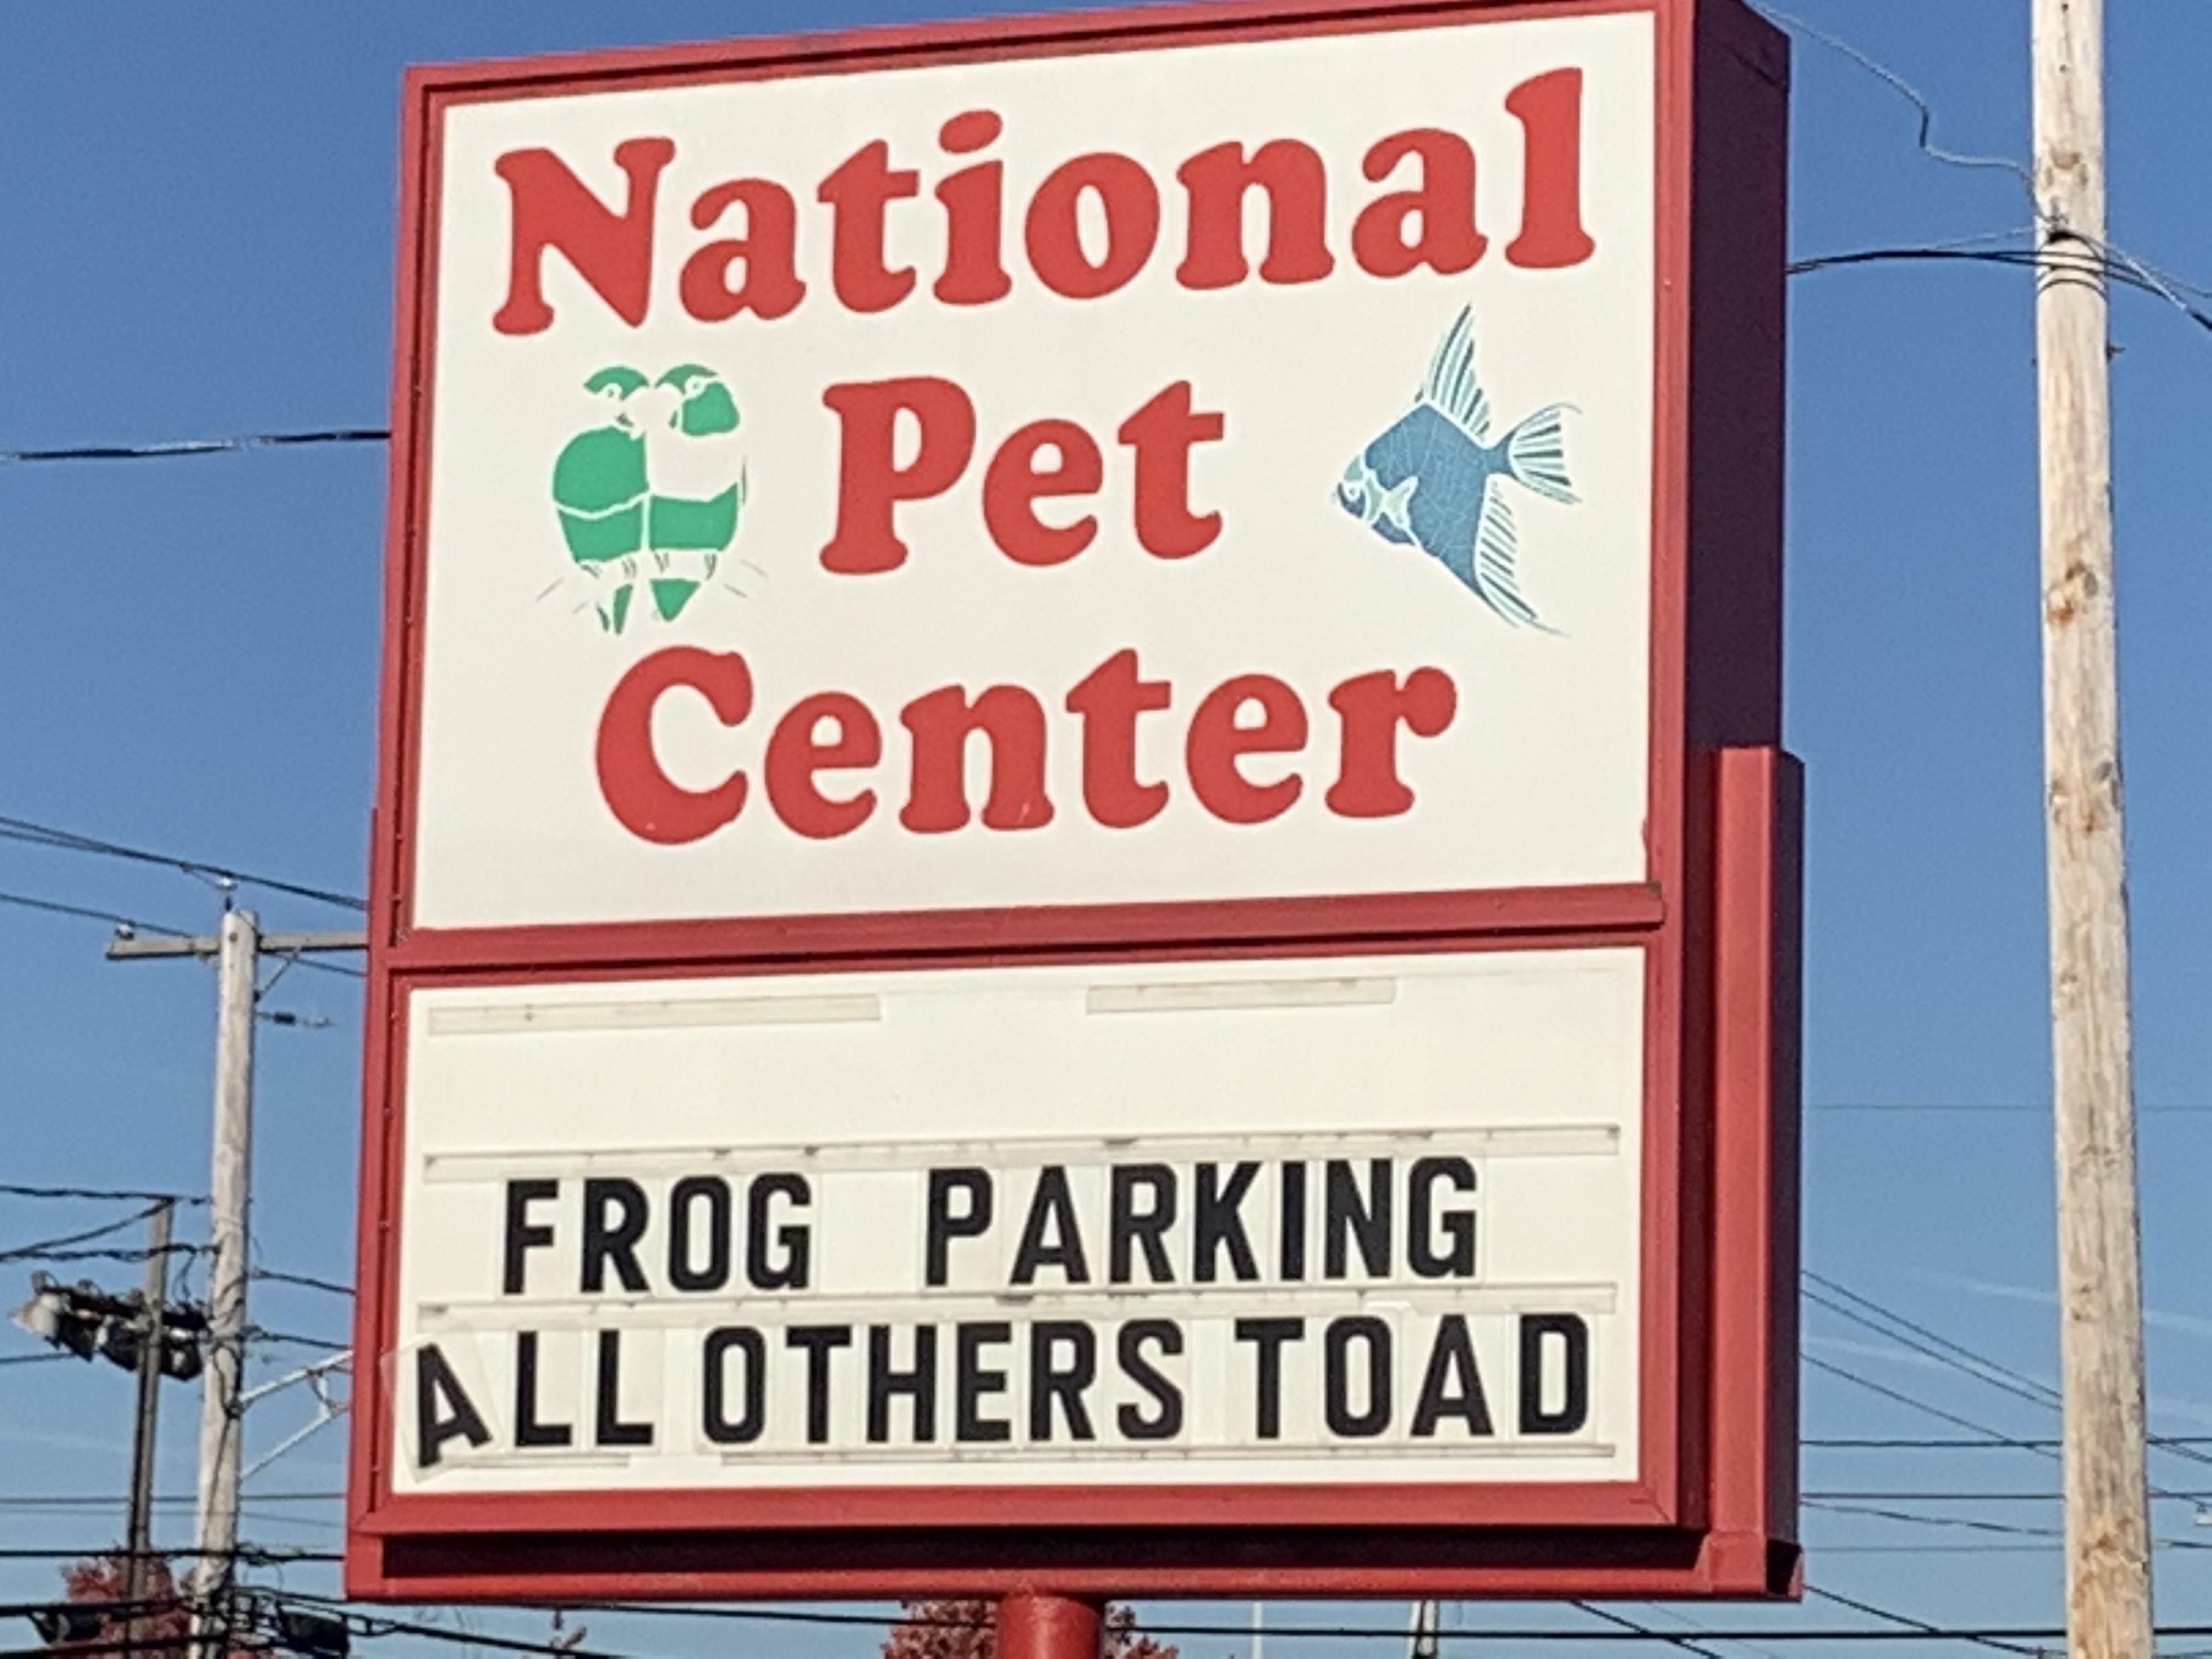 My local pet store owner must be a dad